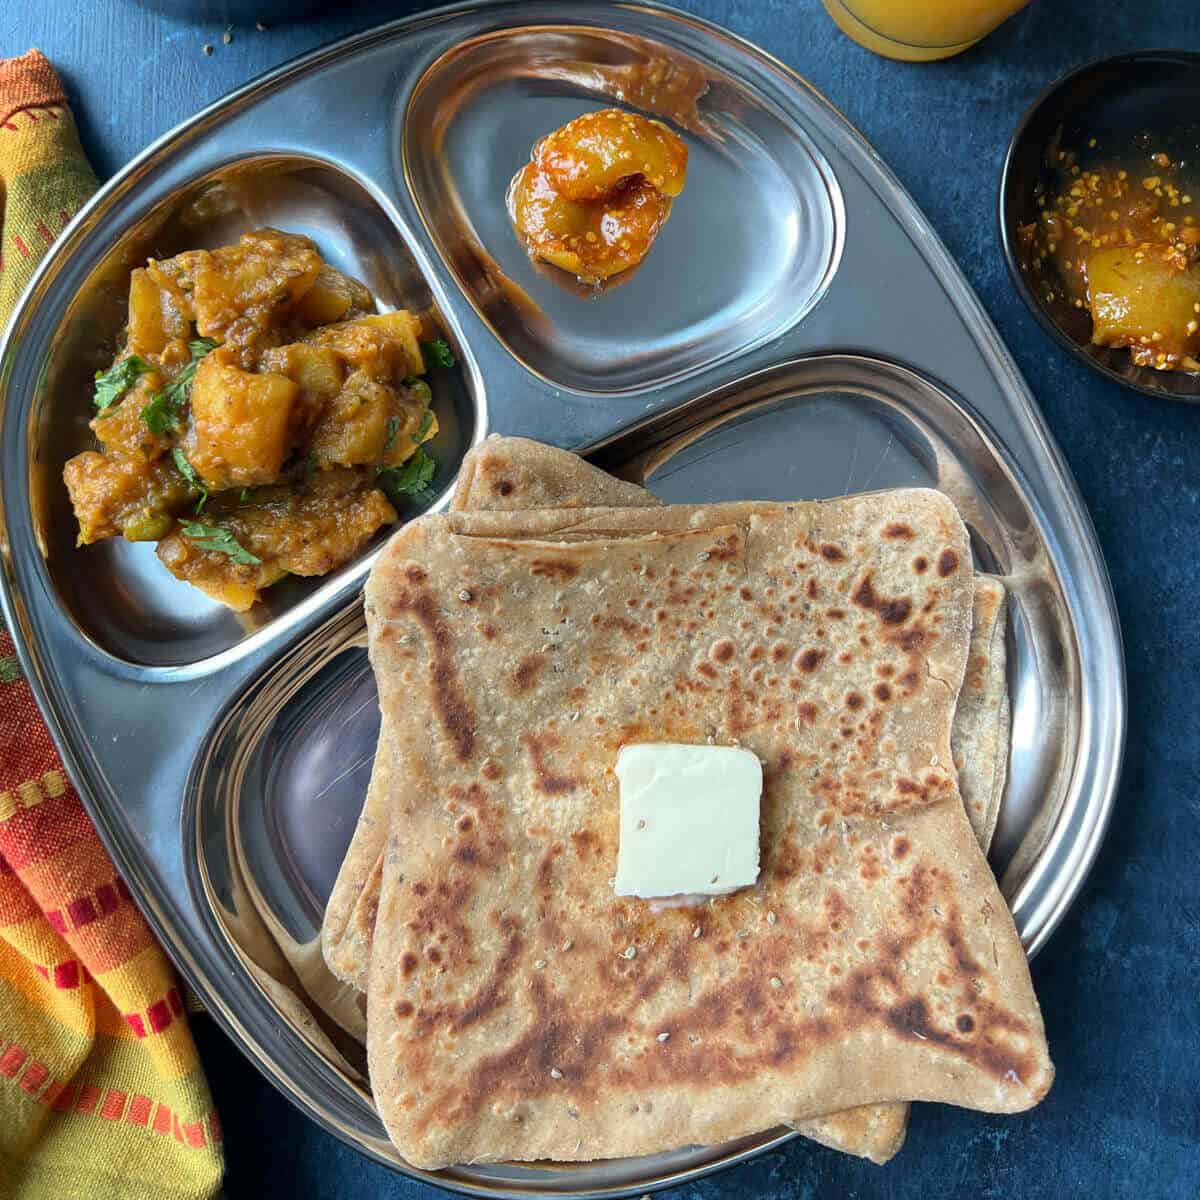 Ajwain paratha sitting on a silver food tray, on a blue counter top. The tray has dividers to separate the curry and mango chutney which is also on the tray. There is a chunk of butter on top of the paratha